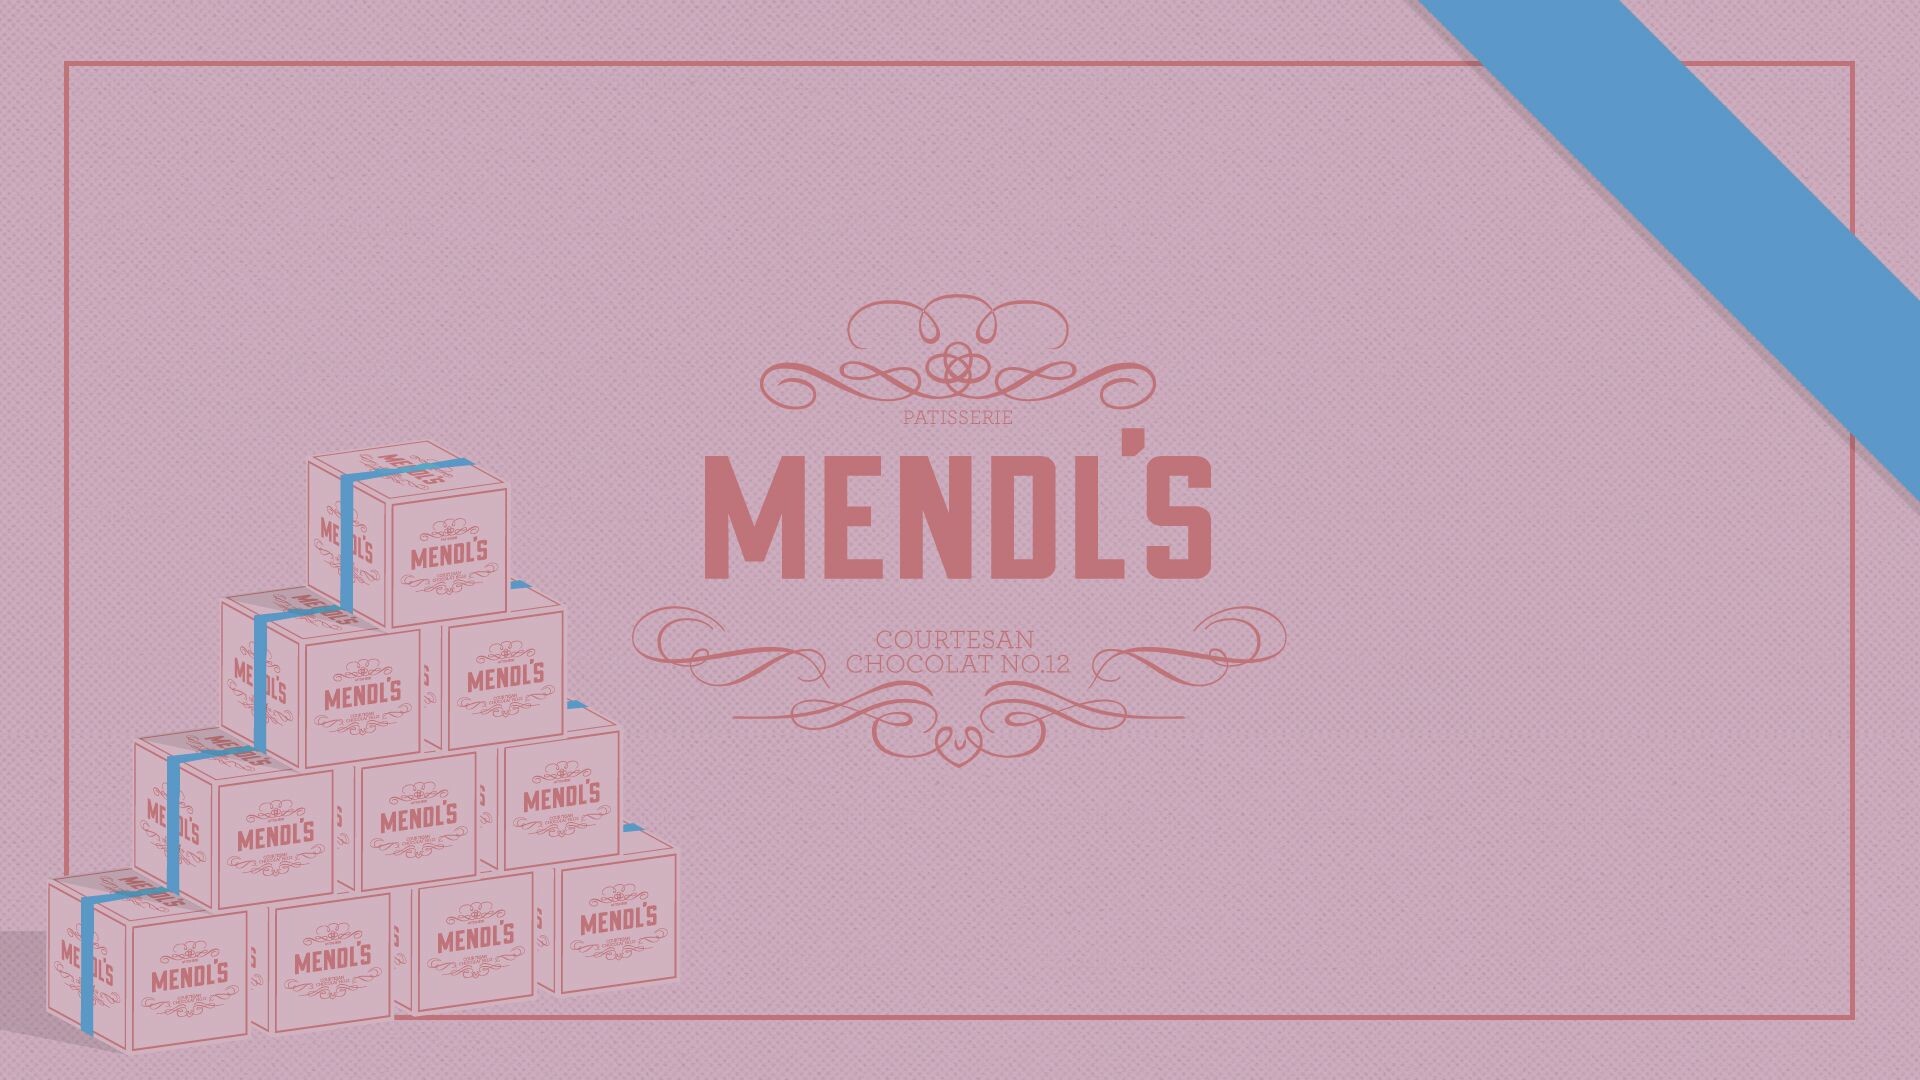 Grand Budapest Hotel, Iconic pink facade, Wes Anderson's creation, Movie fan's favorite, 1920x1080 Full HD Desktop